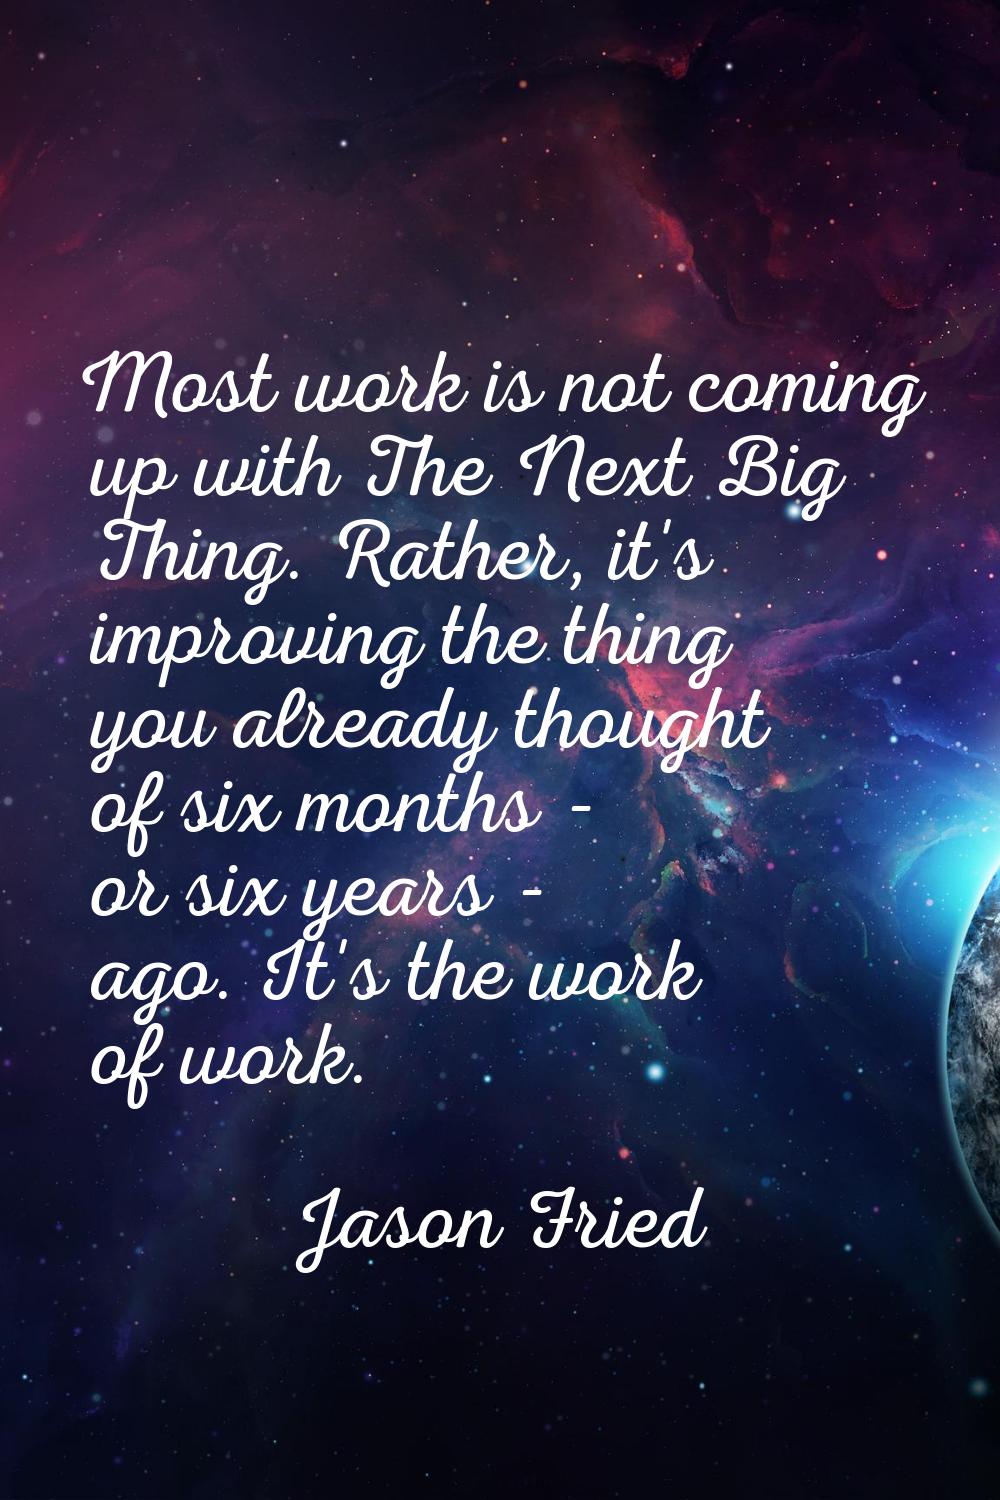 Most work is not coming up with The Next Big Thing. Rather, it's improving the thing you already th